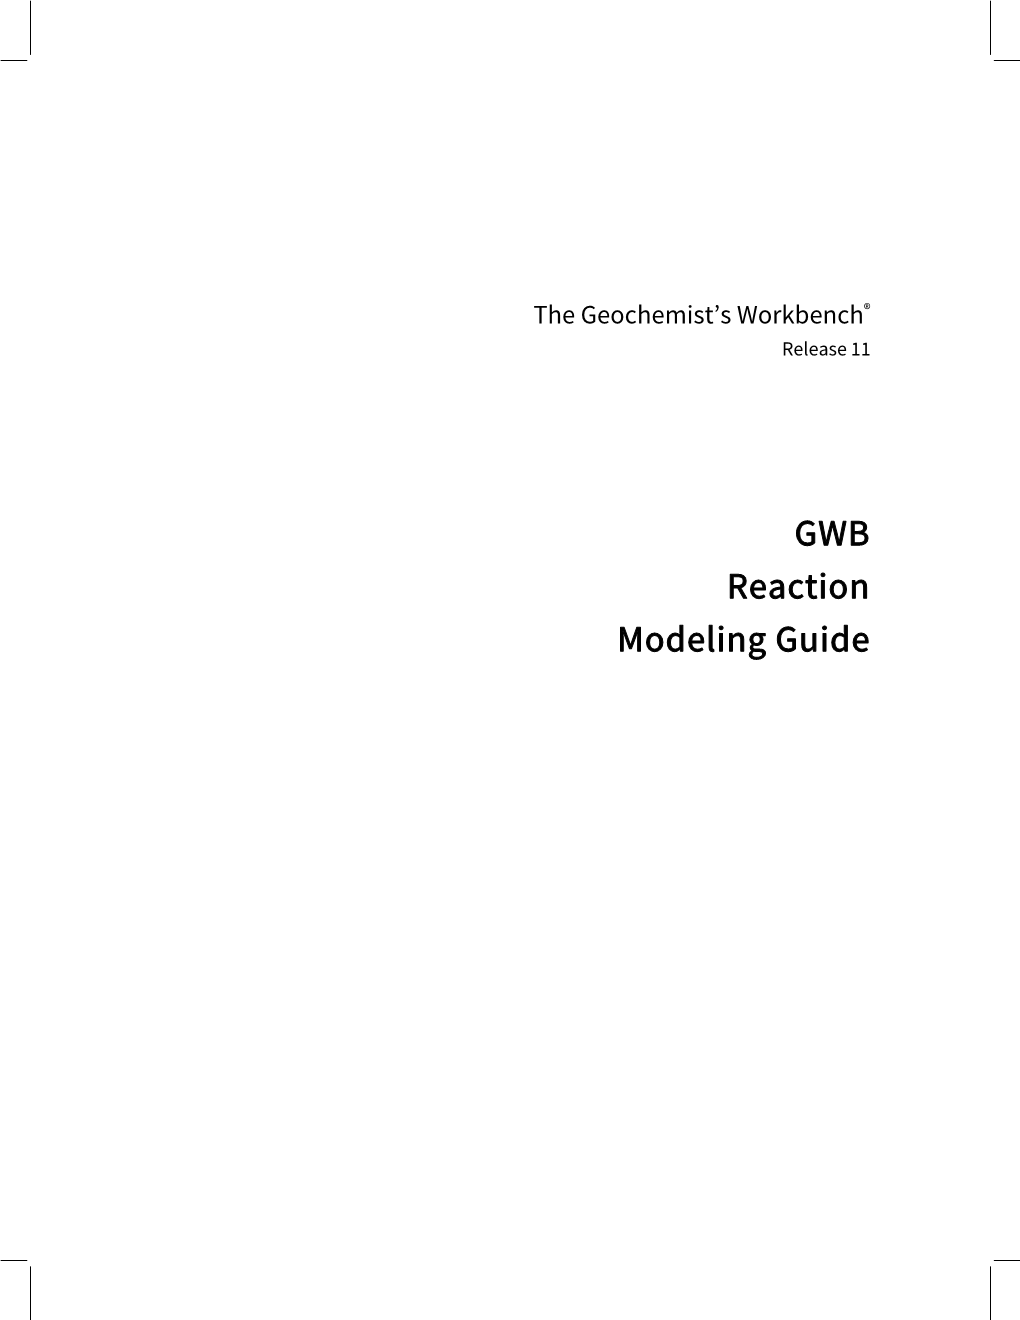 GWB Reaction Modeling Guide